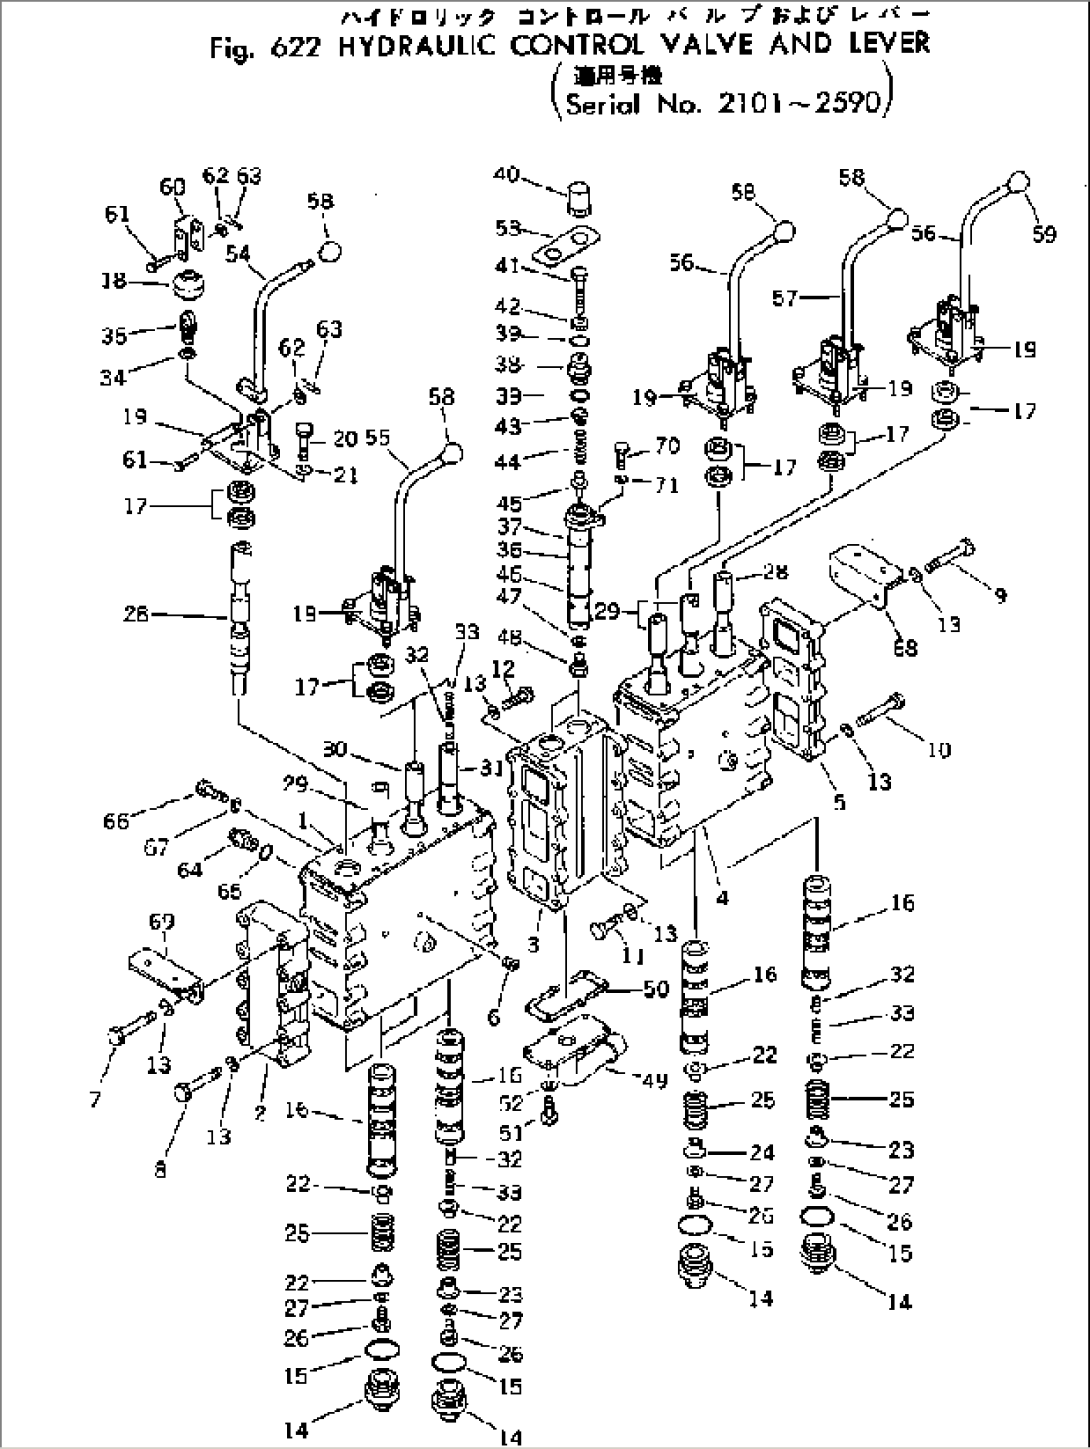 HYDRAULIC CONTROL VALVE AND LEVER(#2101-2590)